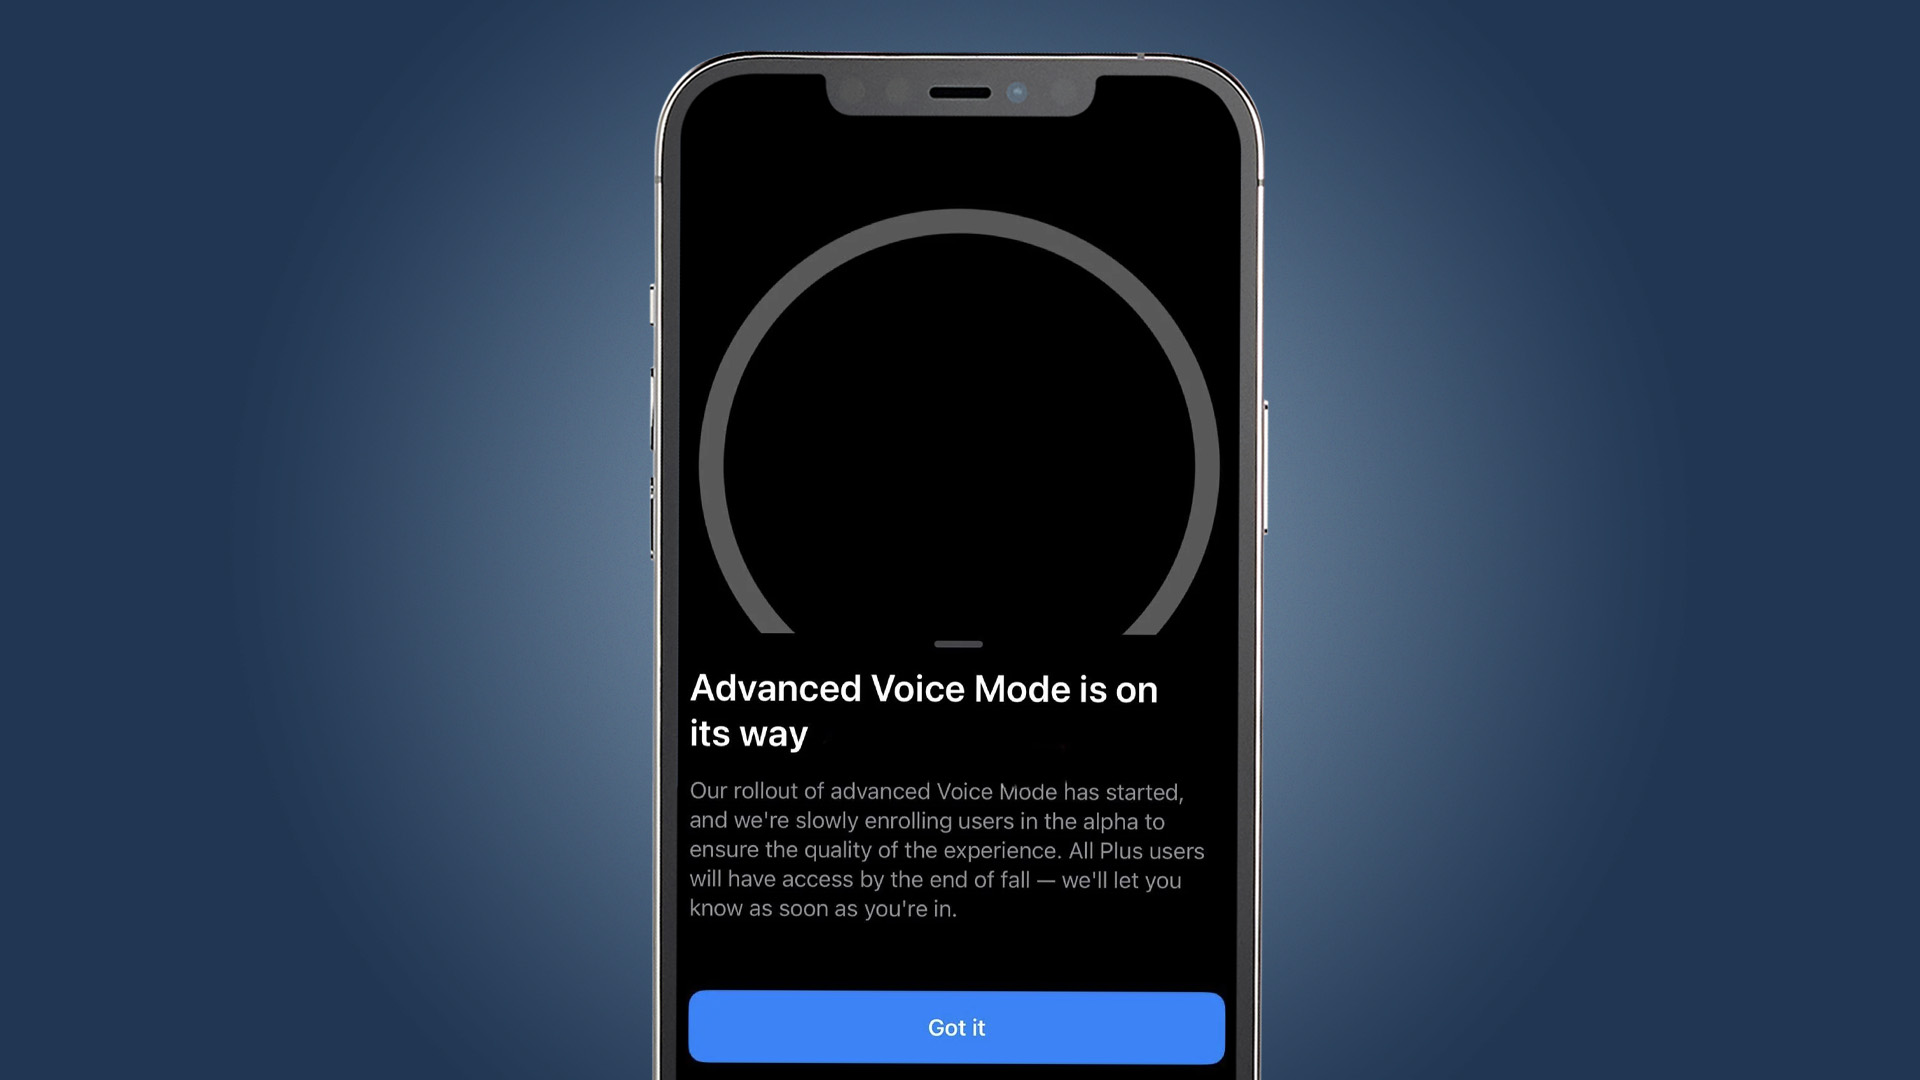 An iPhone on a blue background showing a ChatGPT message about its new Advanced Voice Mode